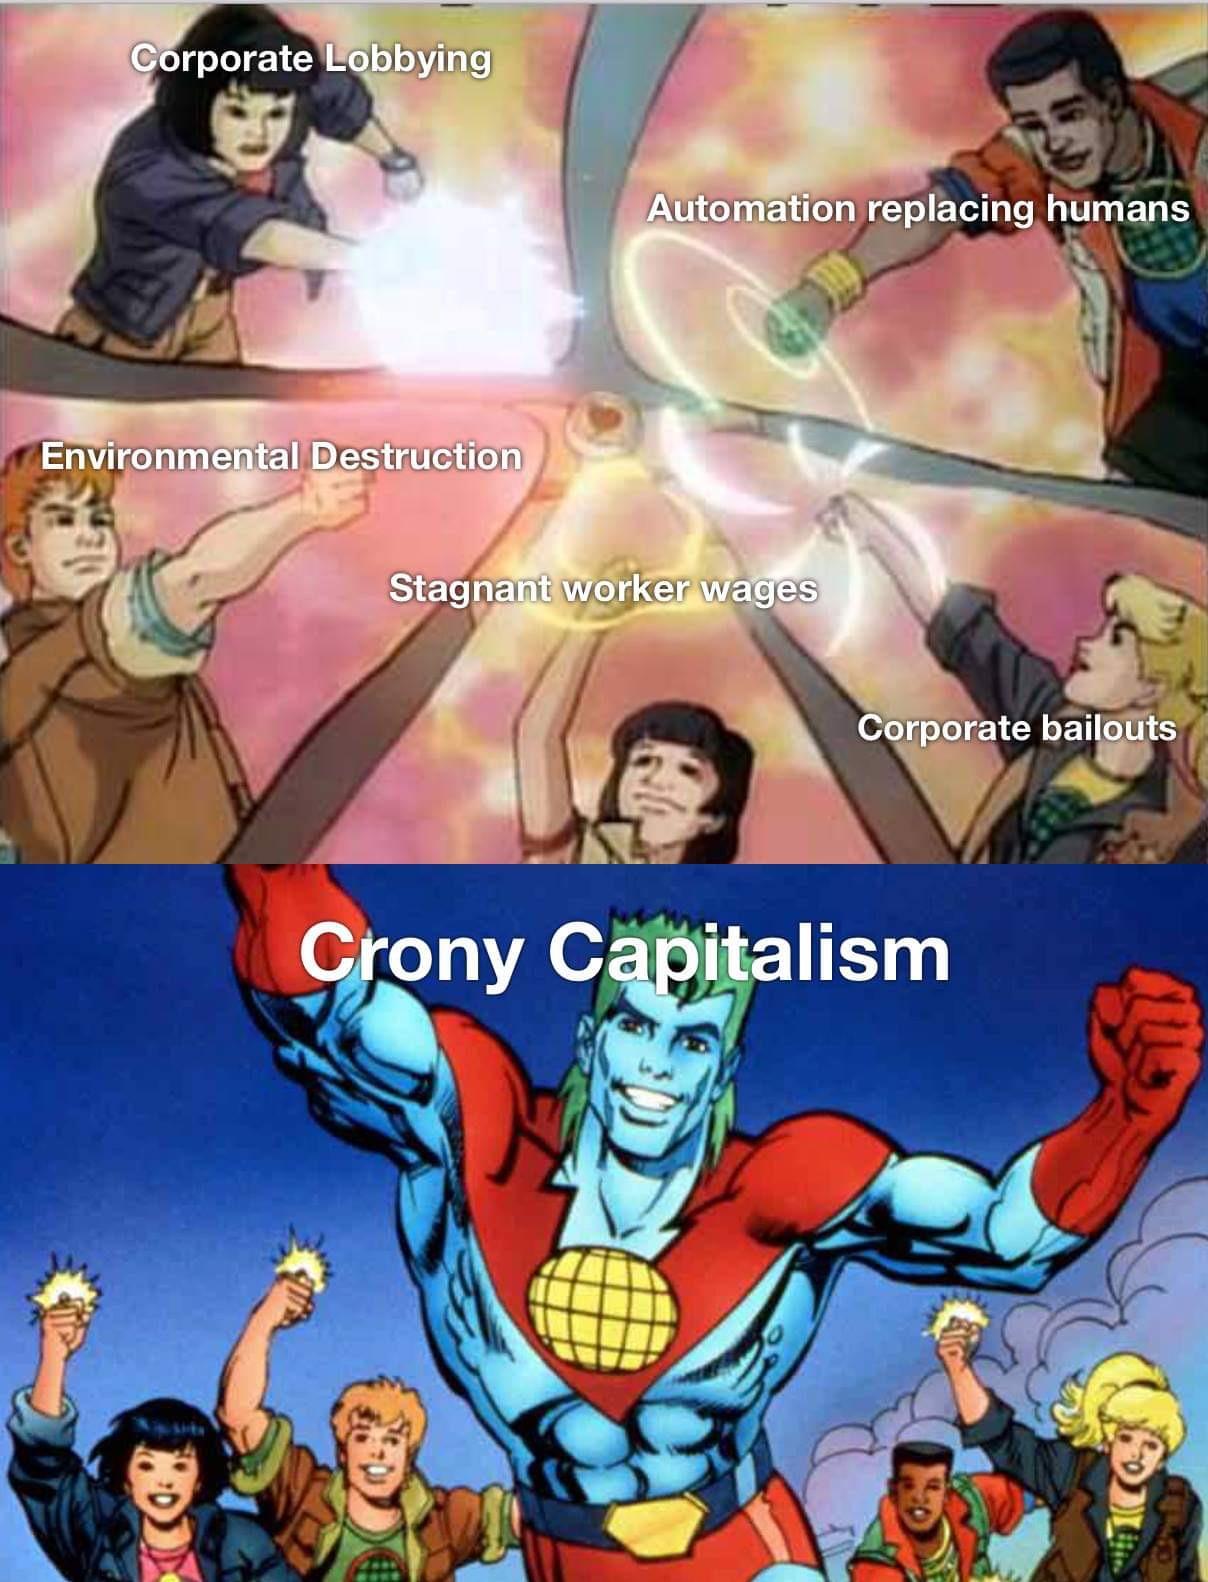 political meme captain planet and the planeteers - Corporate Lobbying Automation replacing humans Environmental Destruction Stagnant worker wages Corporate bailouts Crony Capitalism